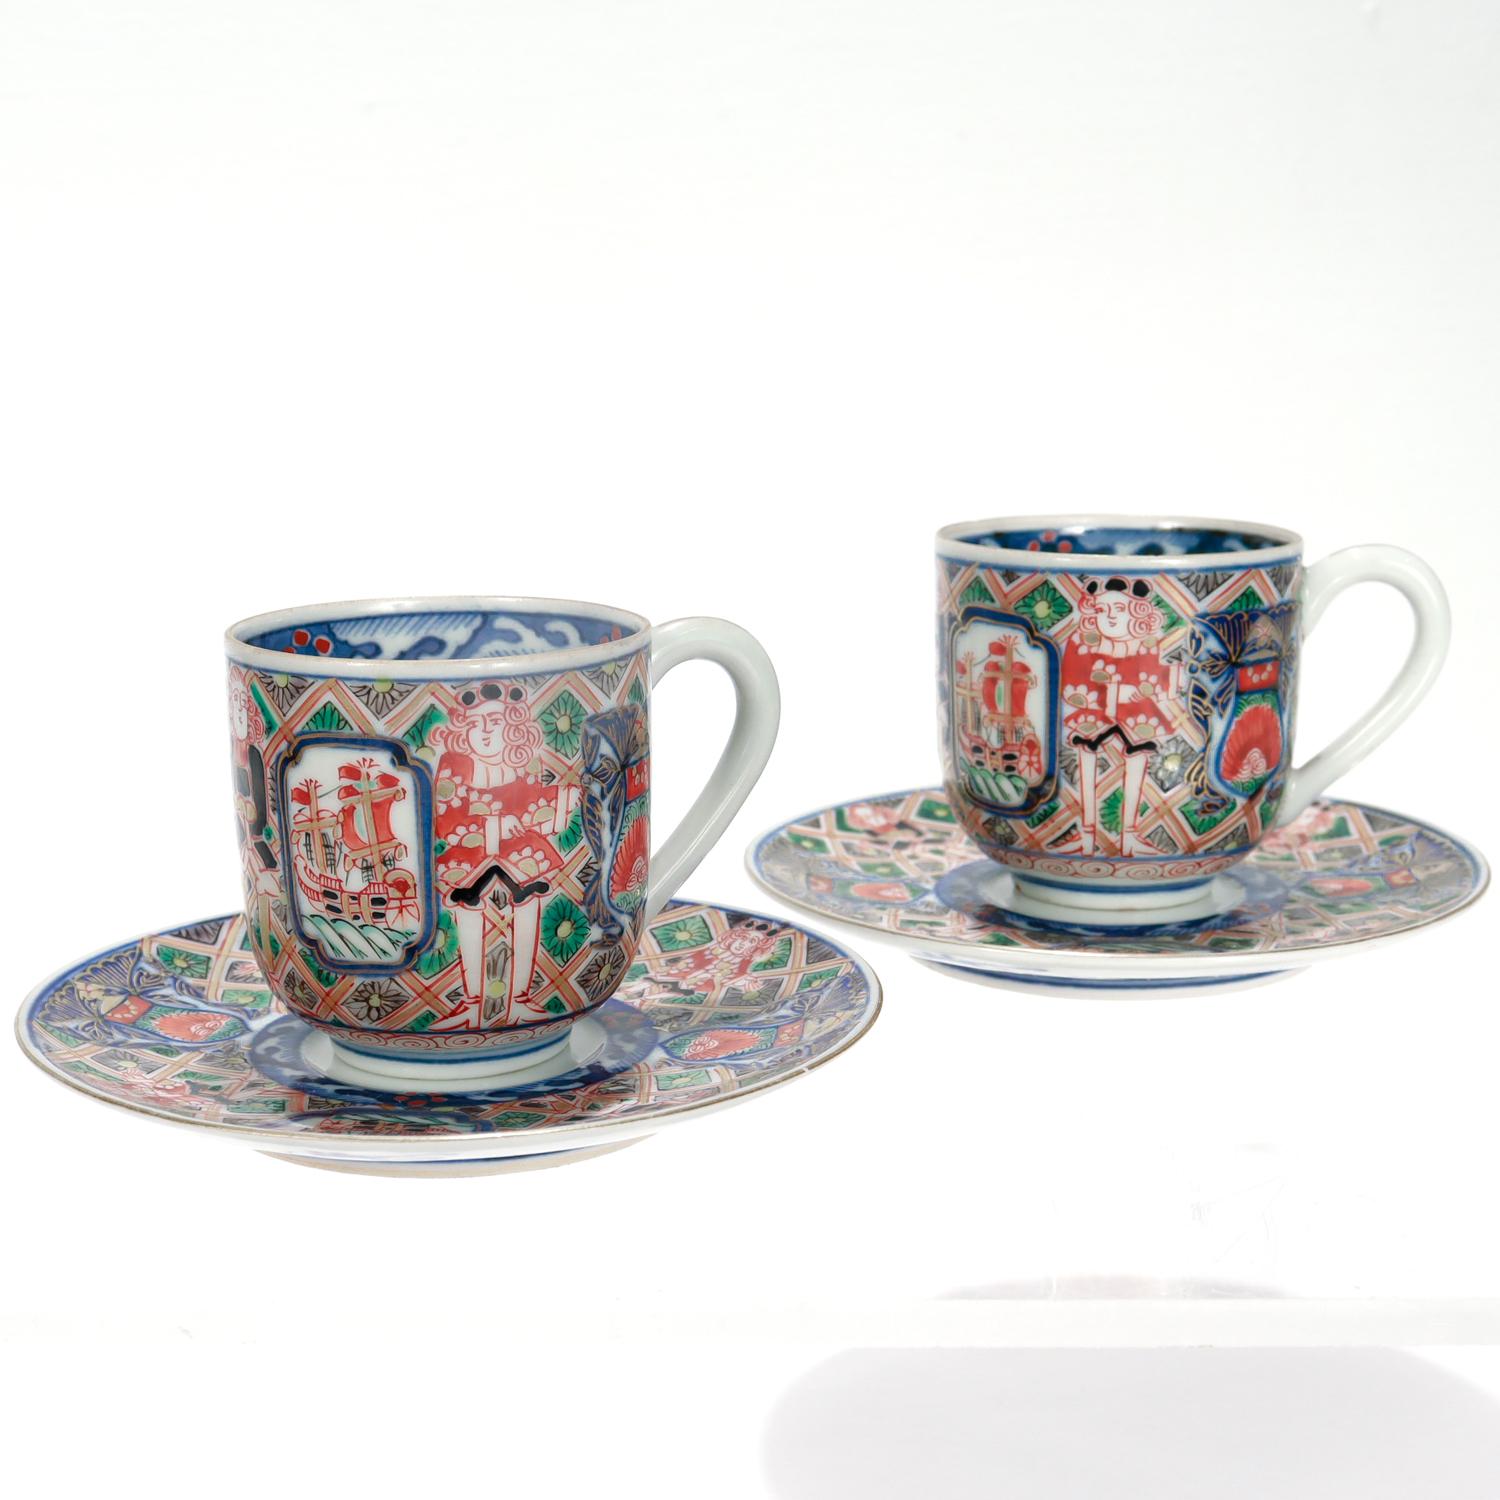 A fine pair of antique Japanese Imari porcelains demitasse coffee or tea cups & saucers.

In the 'Black Ship' pattern.

Decorated throughout with painted depictions of Western sailors and their ships in reds, blues, and greens with extensive gilt